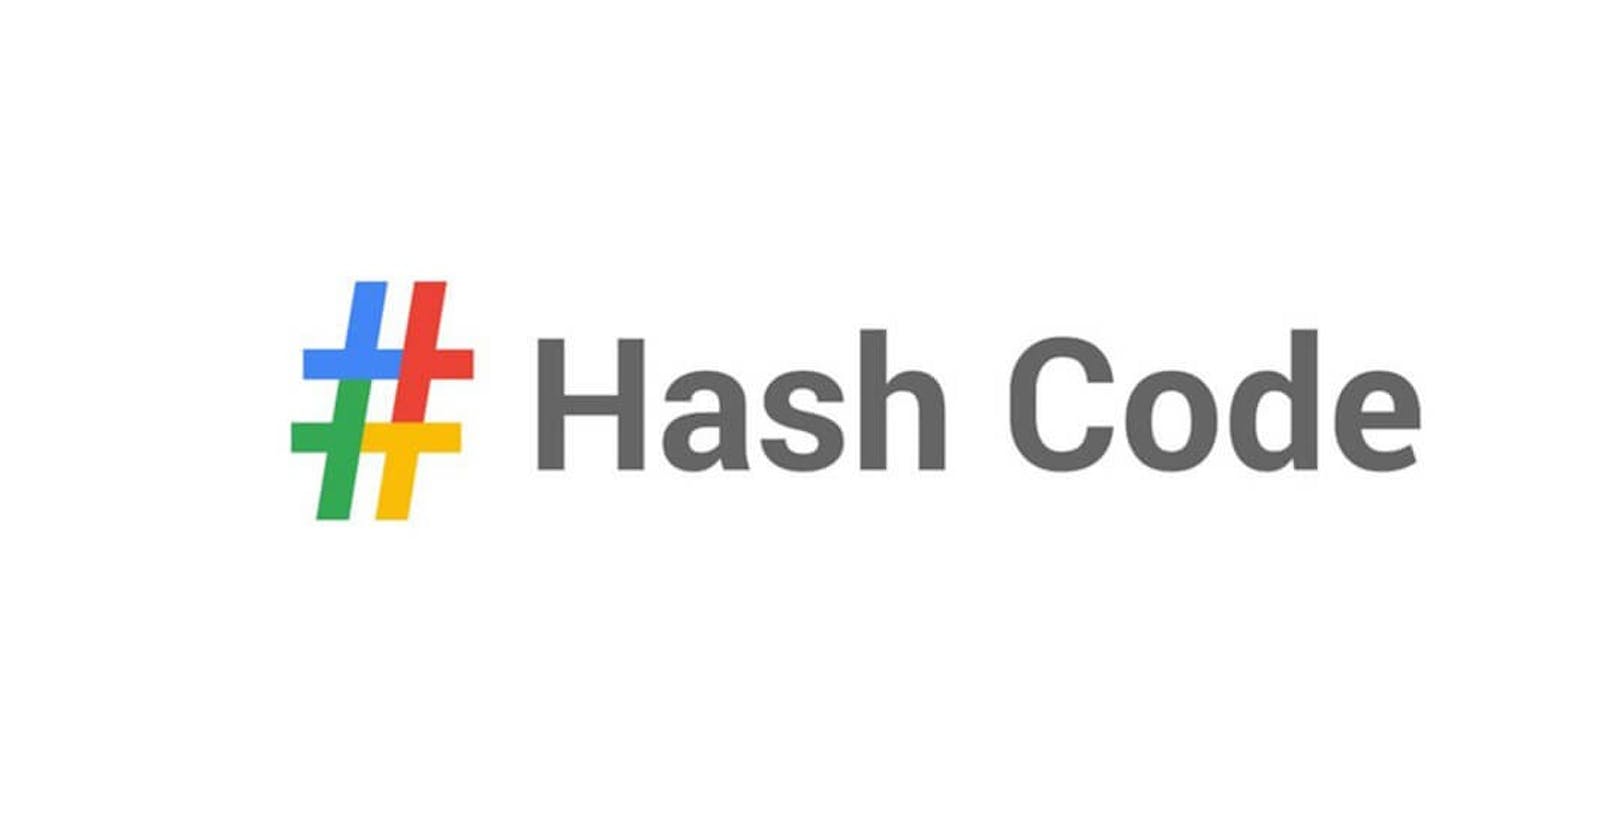 HashCode 2020: My Experience and how to approach HashCode